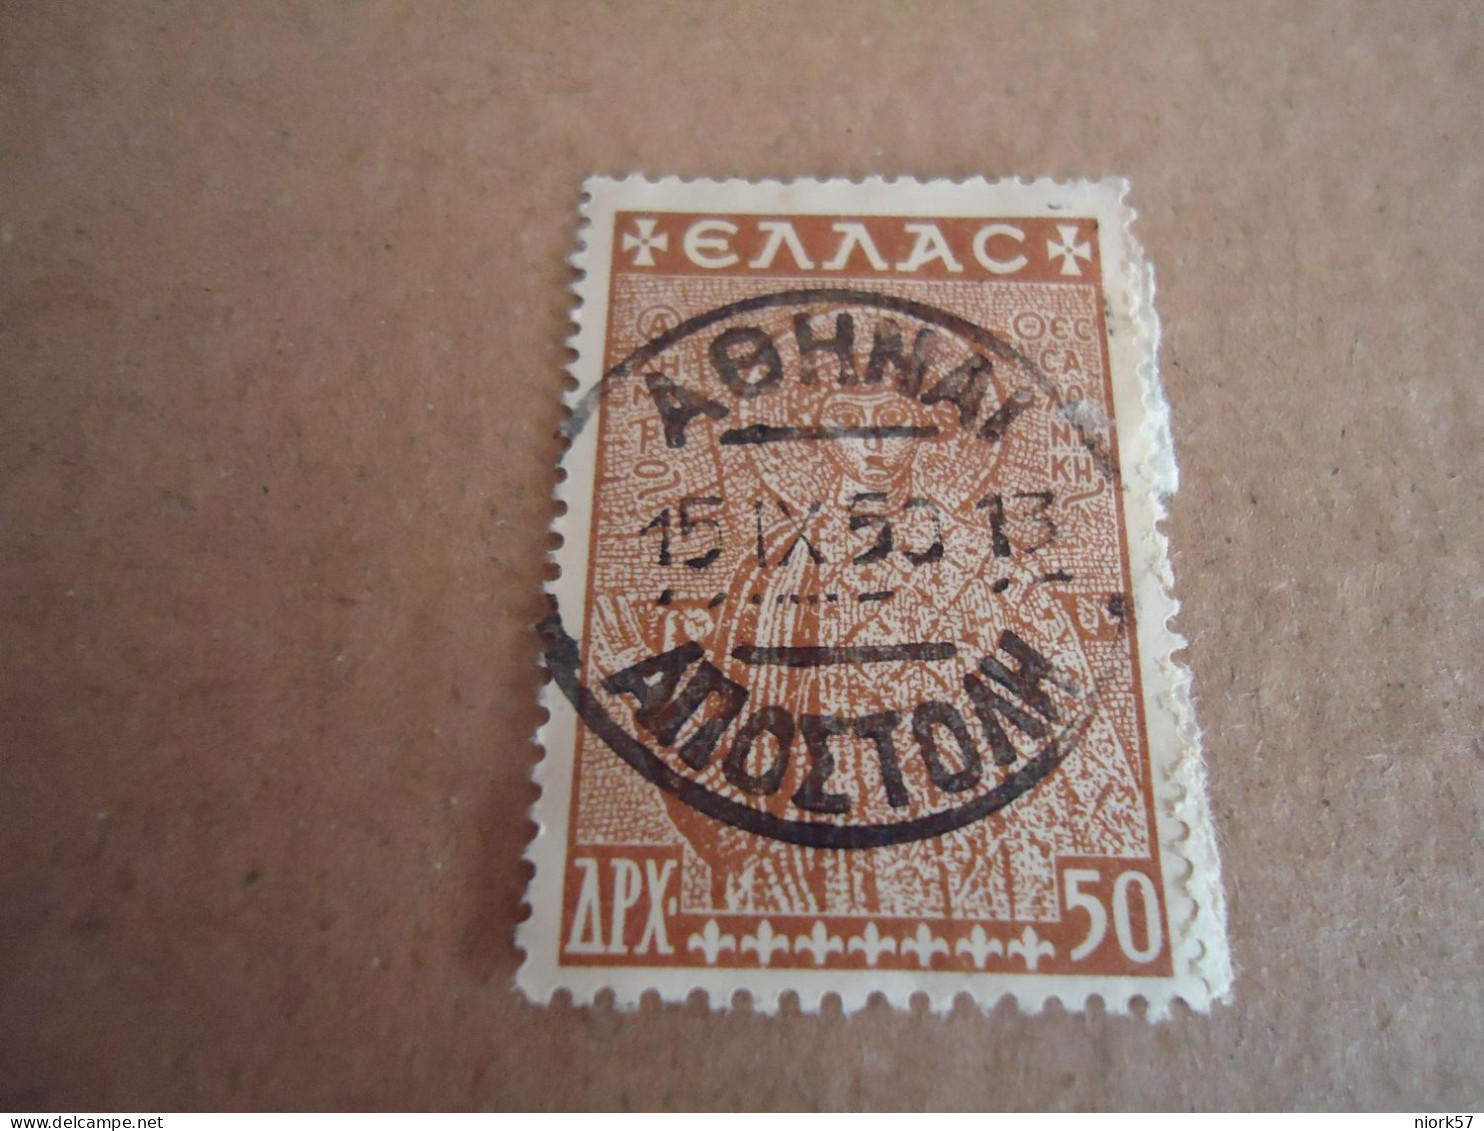 GREECE   POSTMARK ON STAMPS   ΑΘΗΝΑΙ ΑΠΟΣΤΟΛΗ 1953/13 - Affrancature Meccaniche Rosse (EMA)